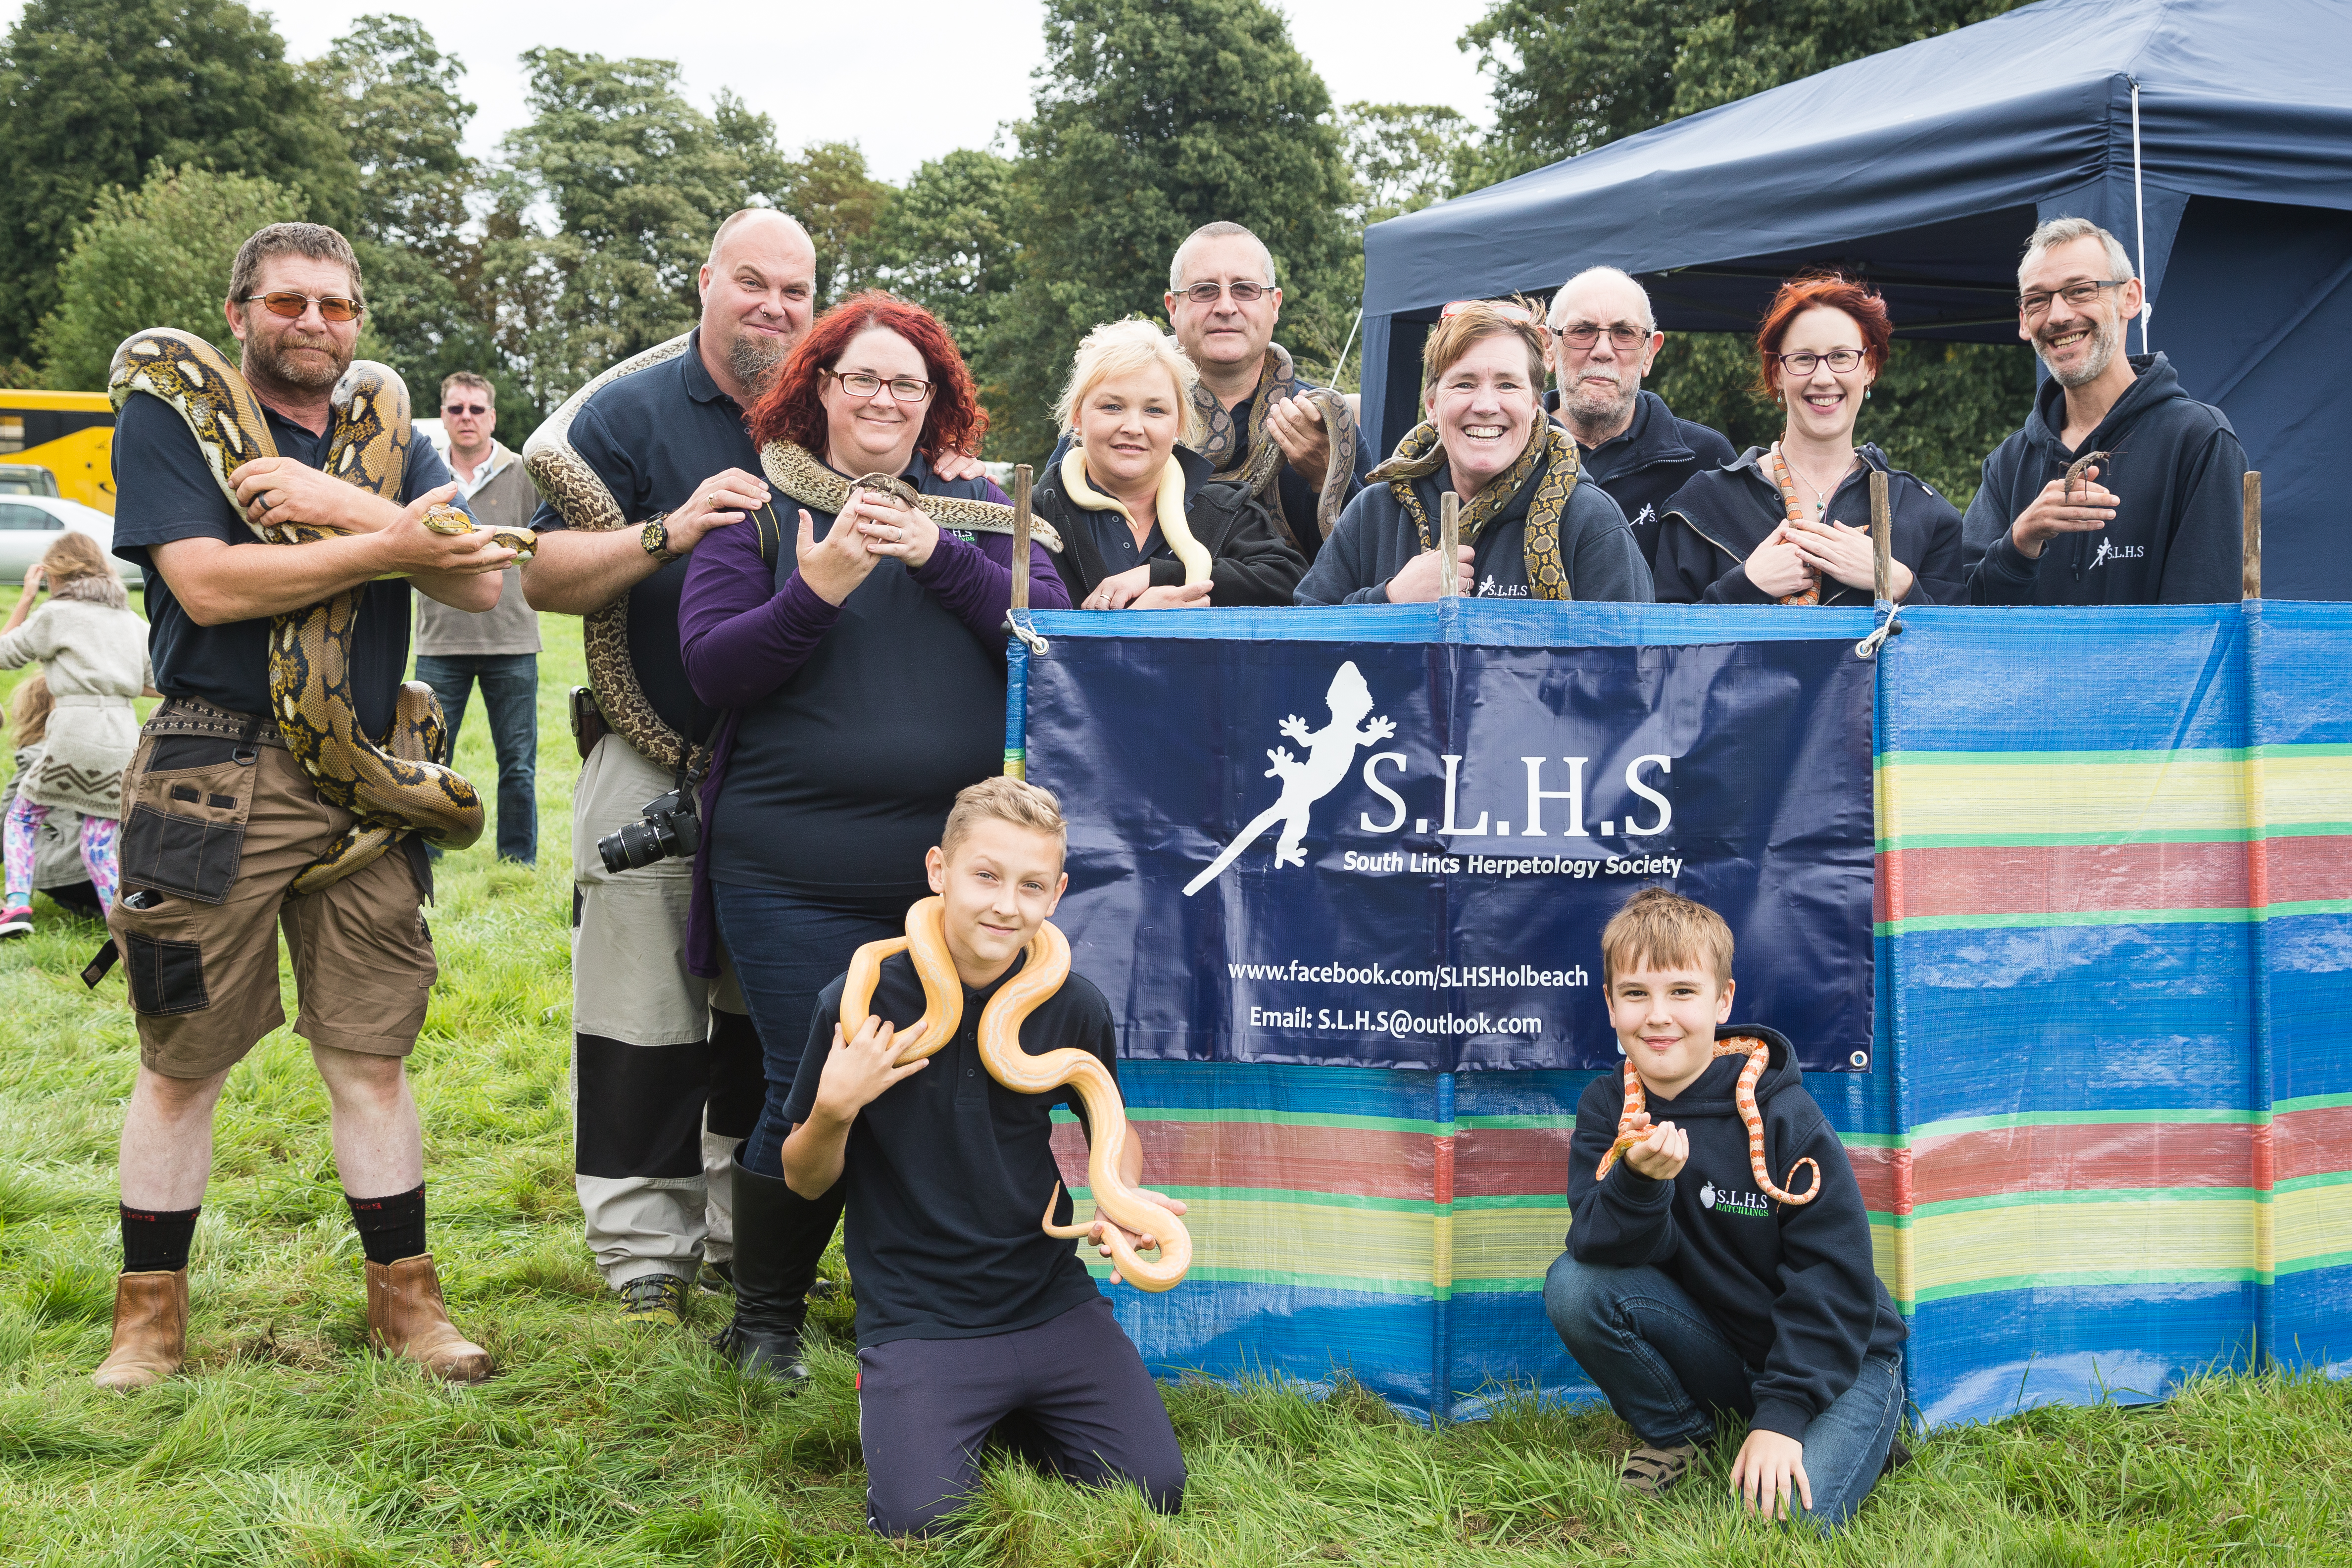 Members of the South Lincs Herpetology Society show off a vast array of reptiles. Photo by Ben Chapman